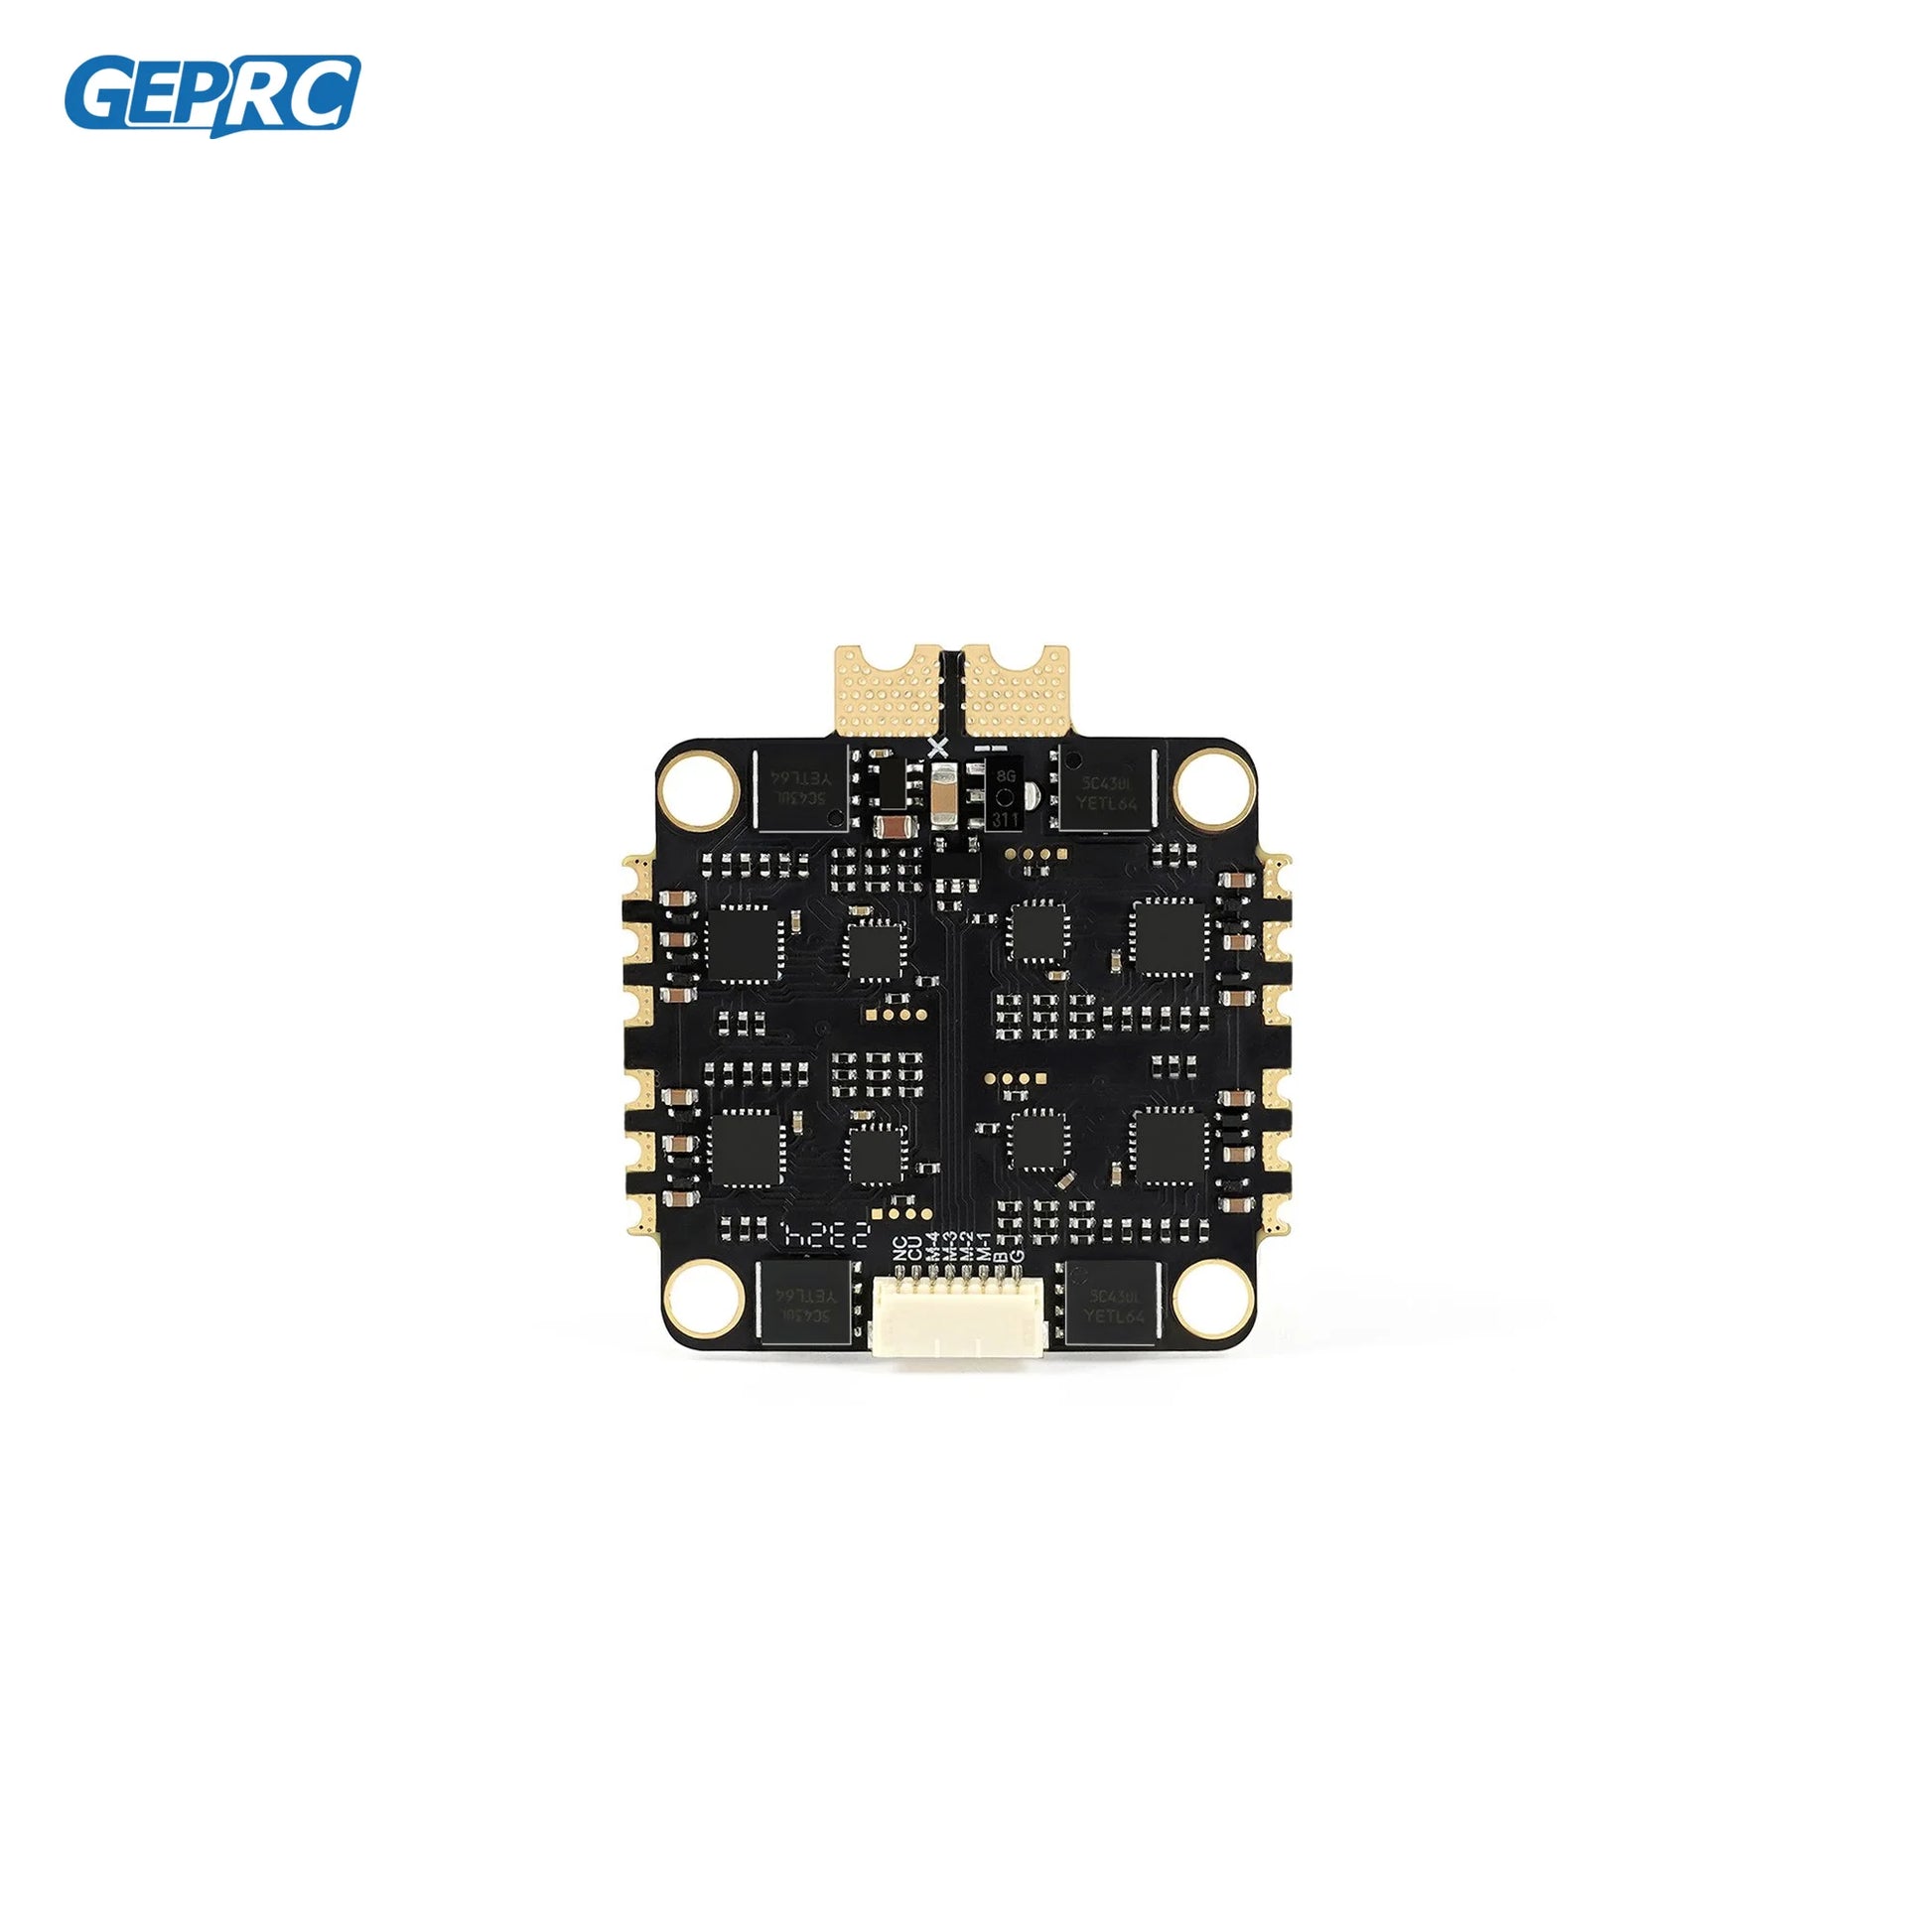 GEPRC GEP-BLS60A-4IN1 ESC - 3-6S 60A Support Dshot 150/300/600